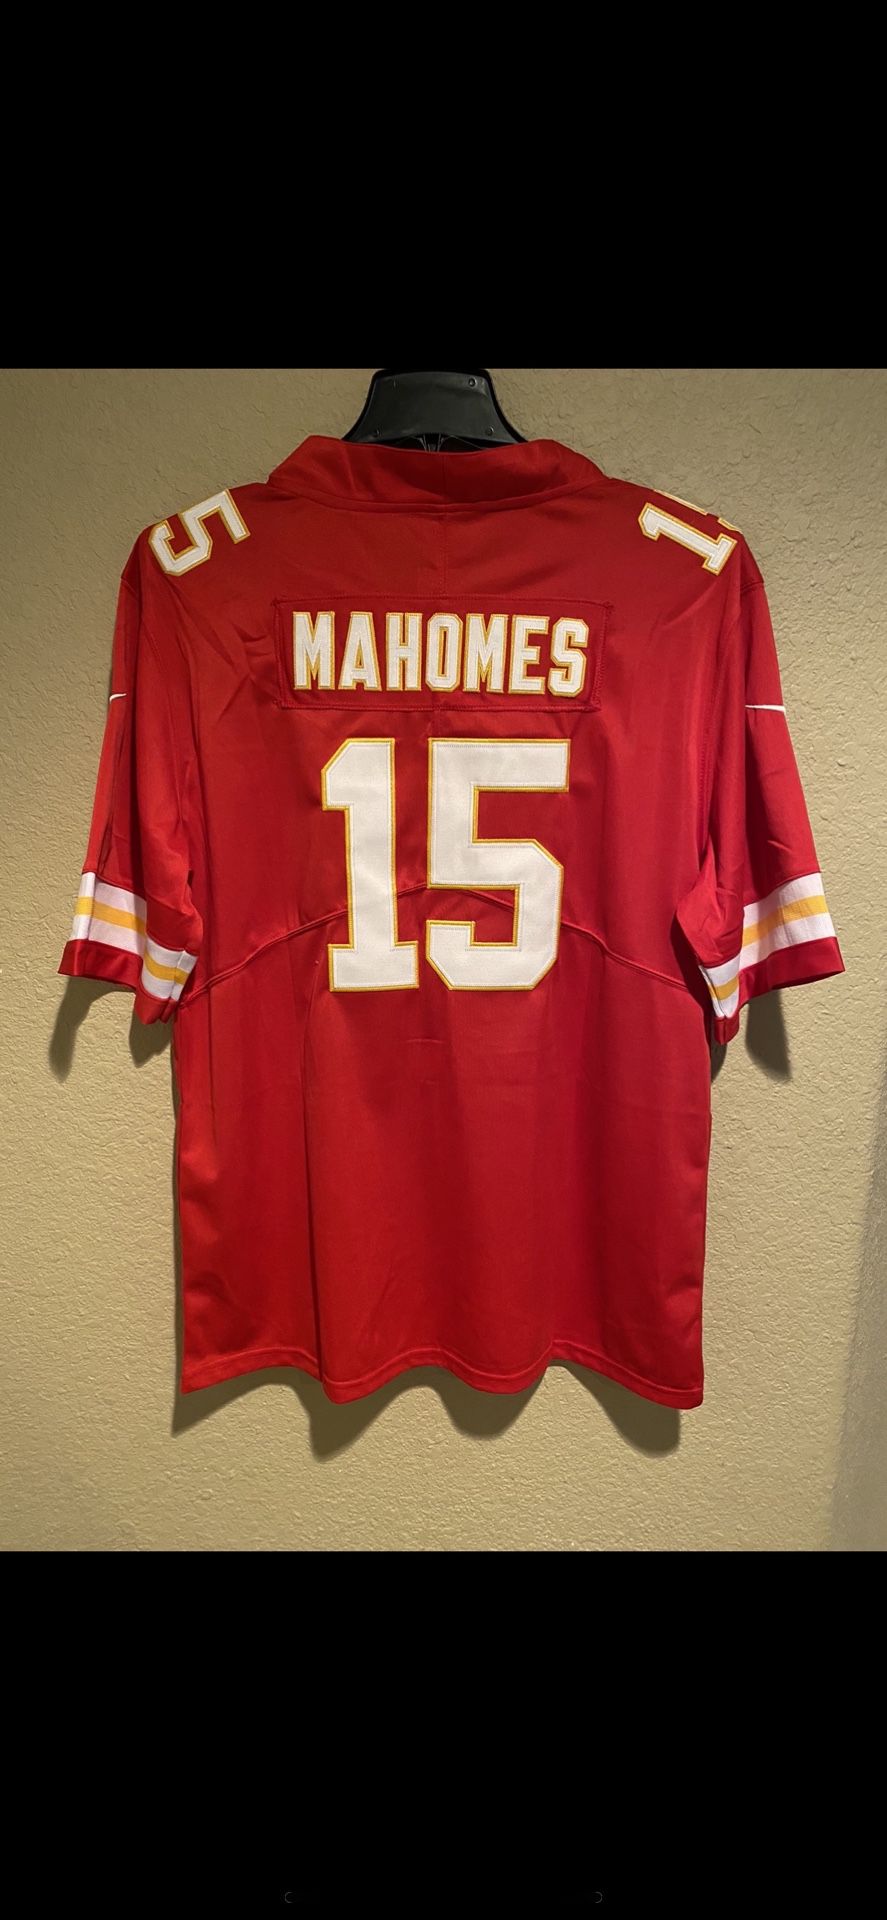 Patrick Mahomes Large New With Tags 